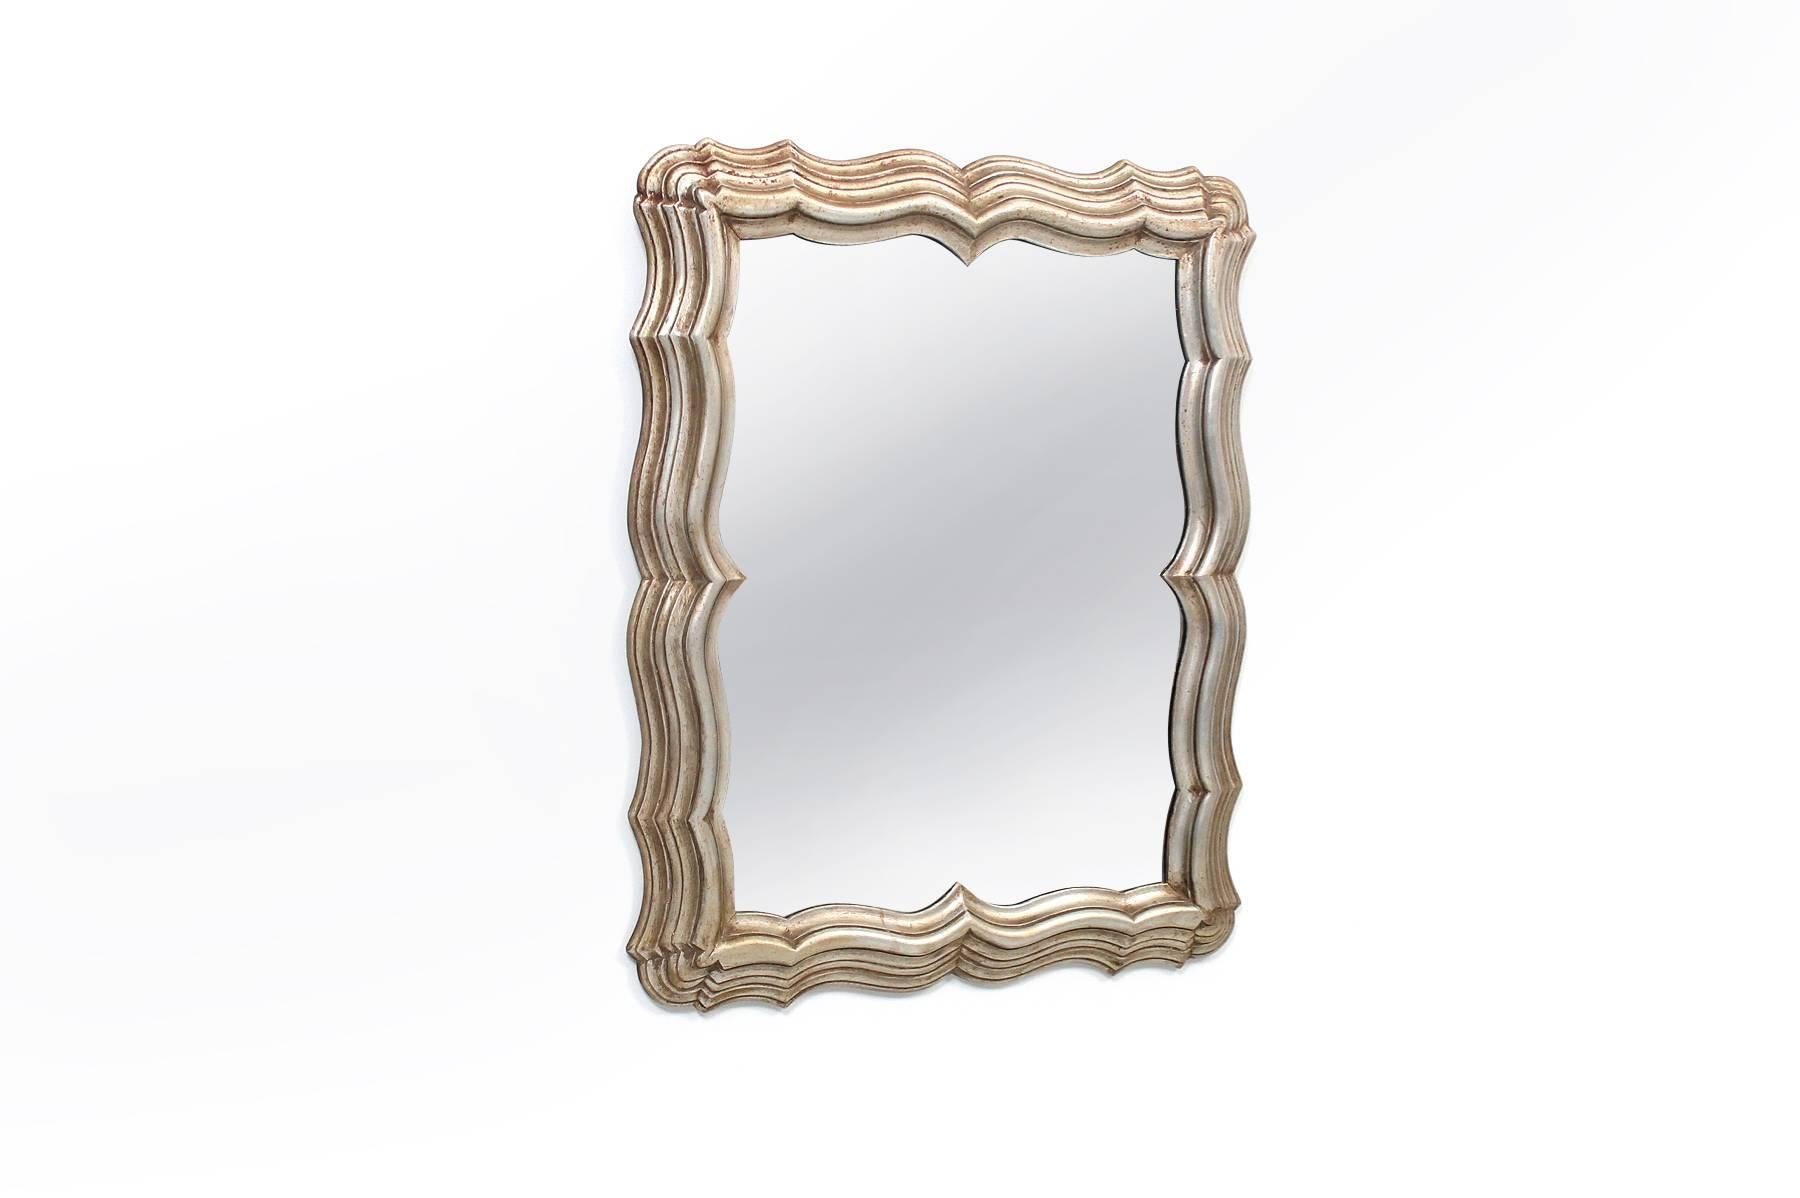 Dramatic carved antiqued silver leaf mirror by Dorothy Draper. Statement piece of the highest quality.